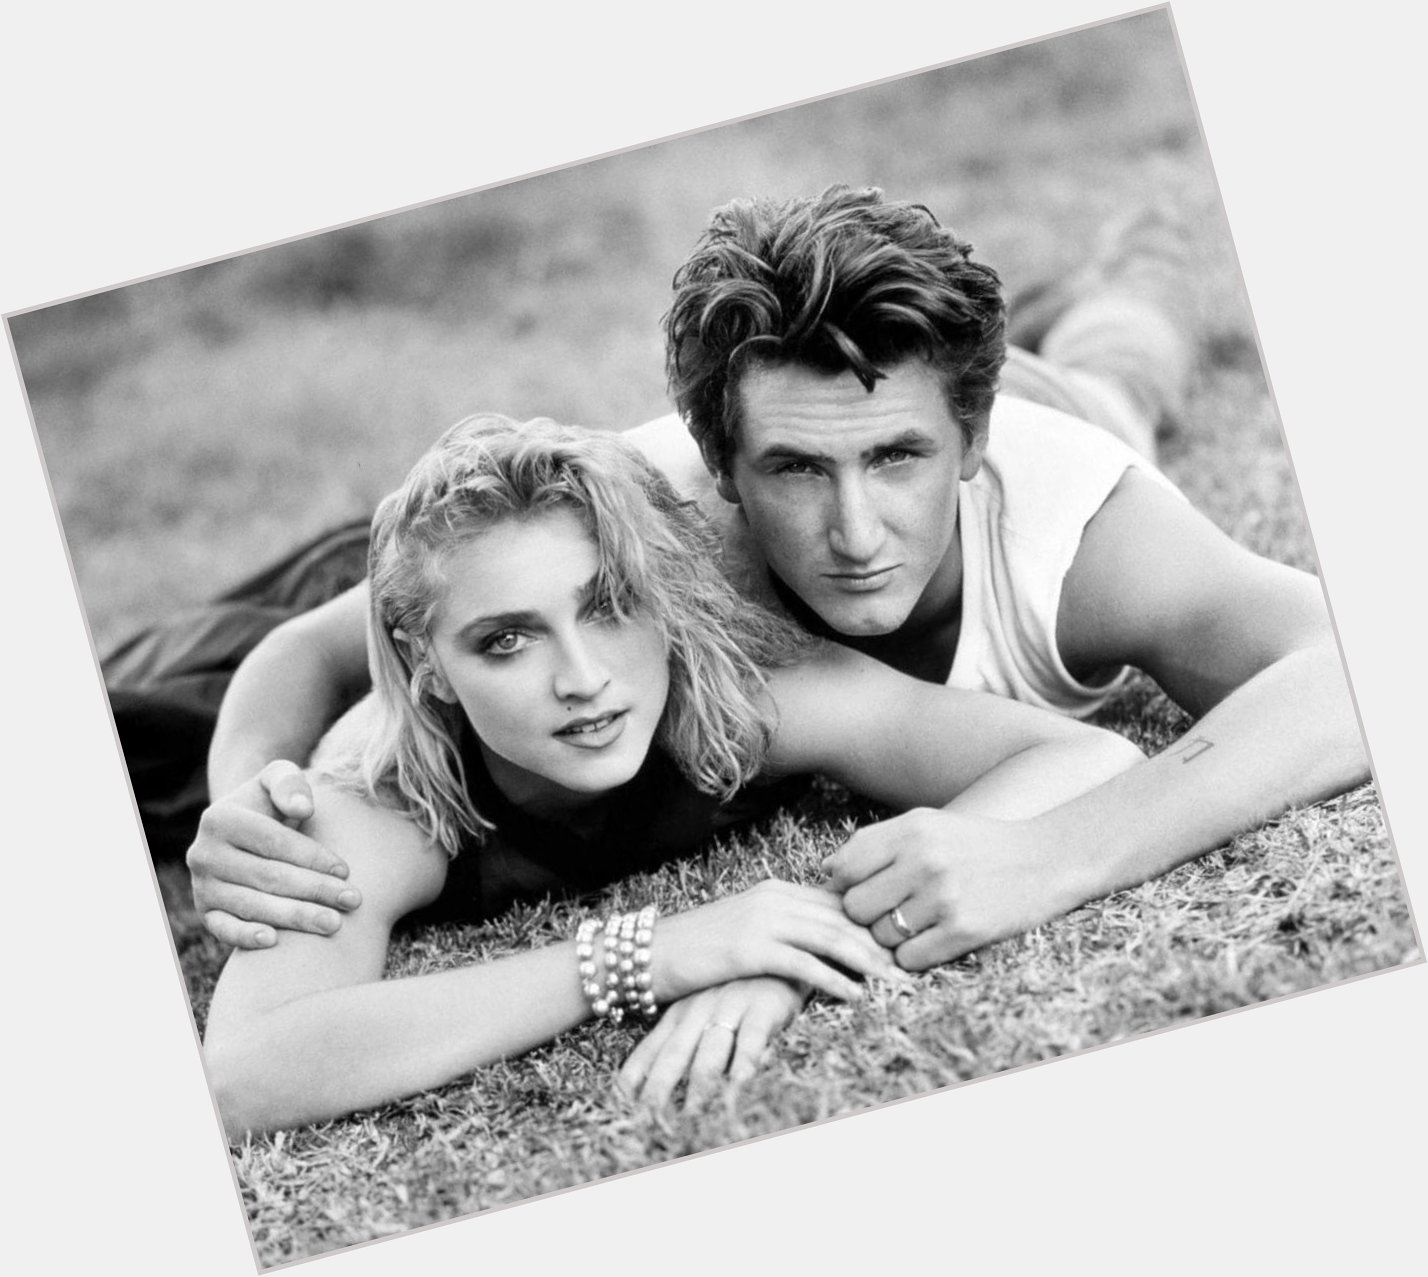 Happy Birthday, Madonna!  Madonna and Sean Penn were married on August 16, 1985.  They divorced in 1989. 